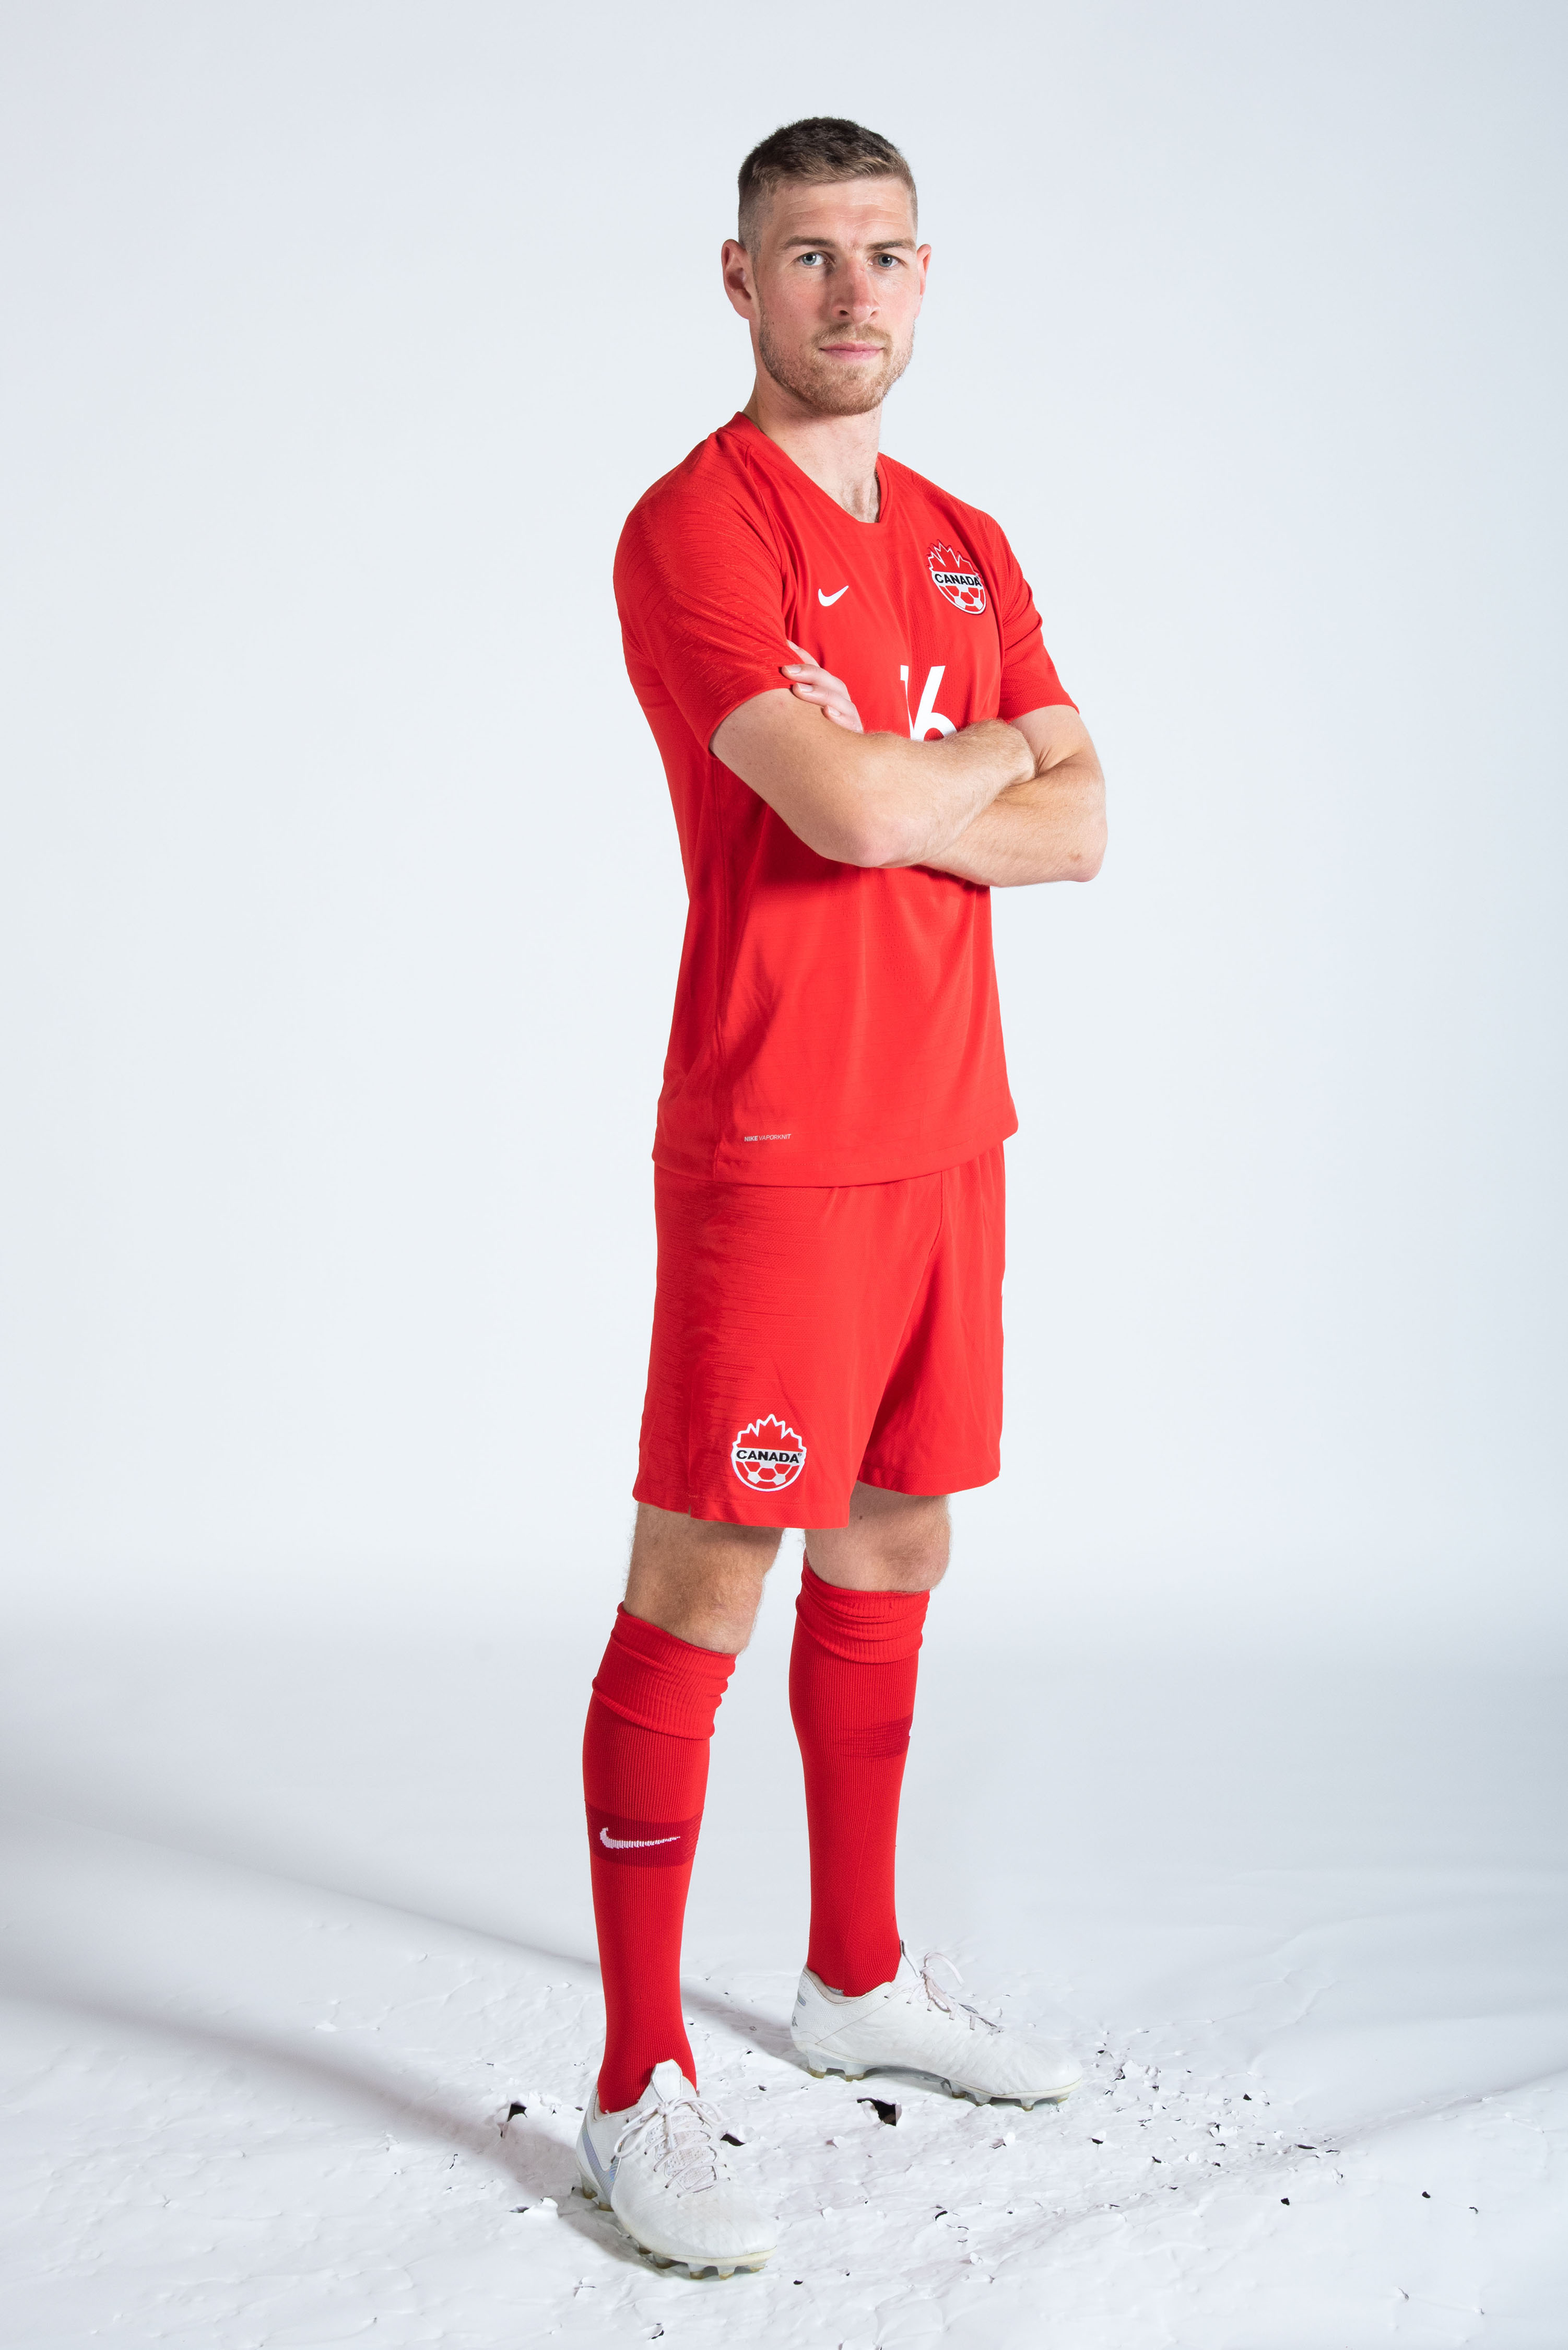 20190904_CANMNT_Wotherspoon_byBazyl06